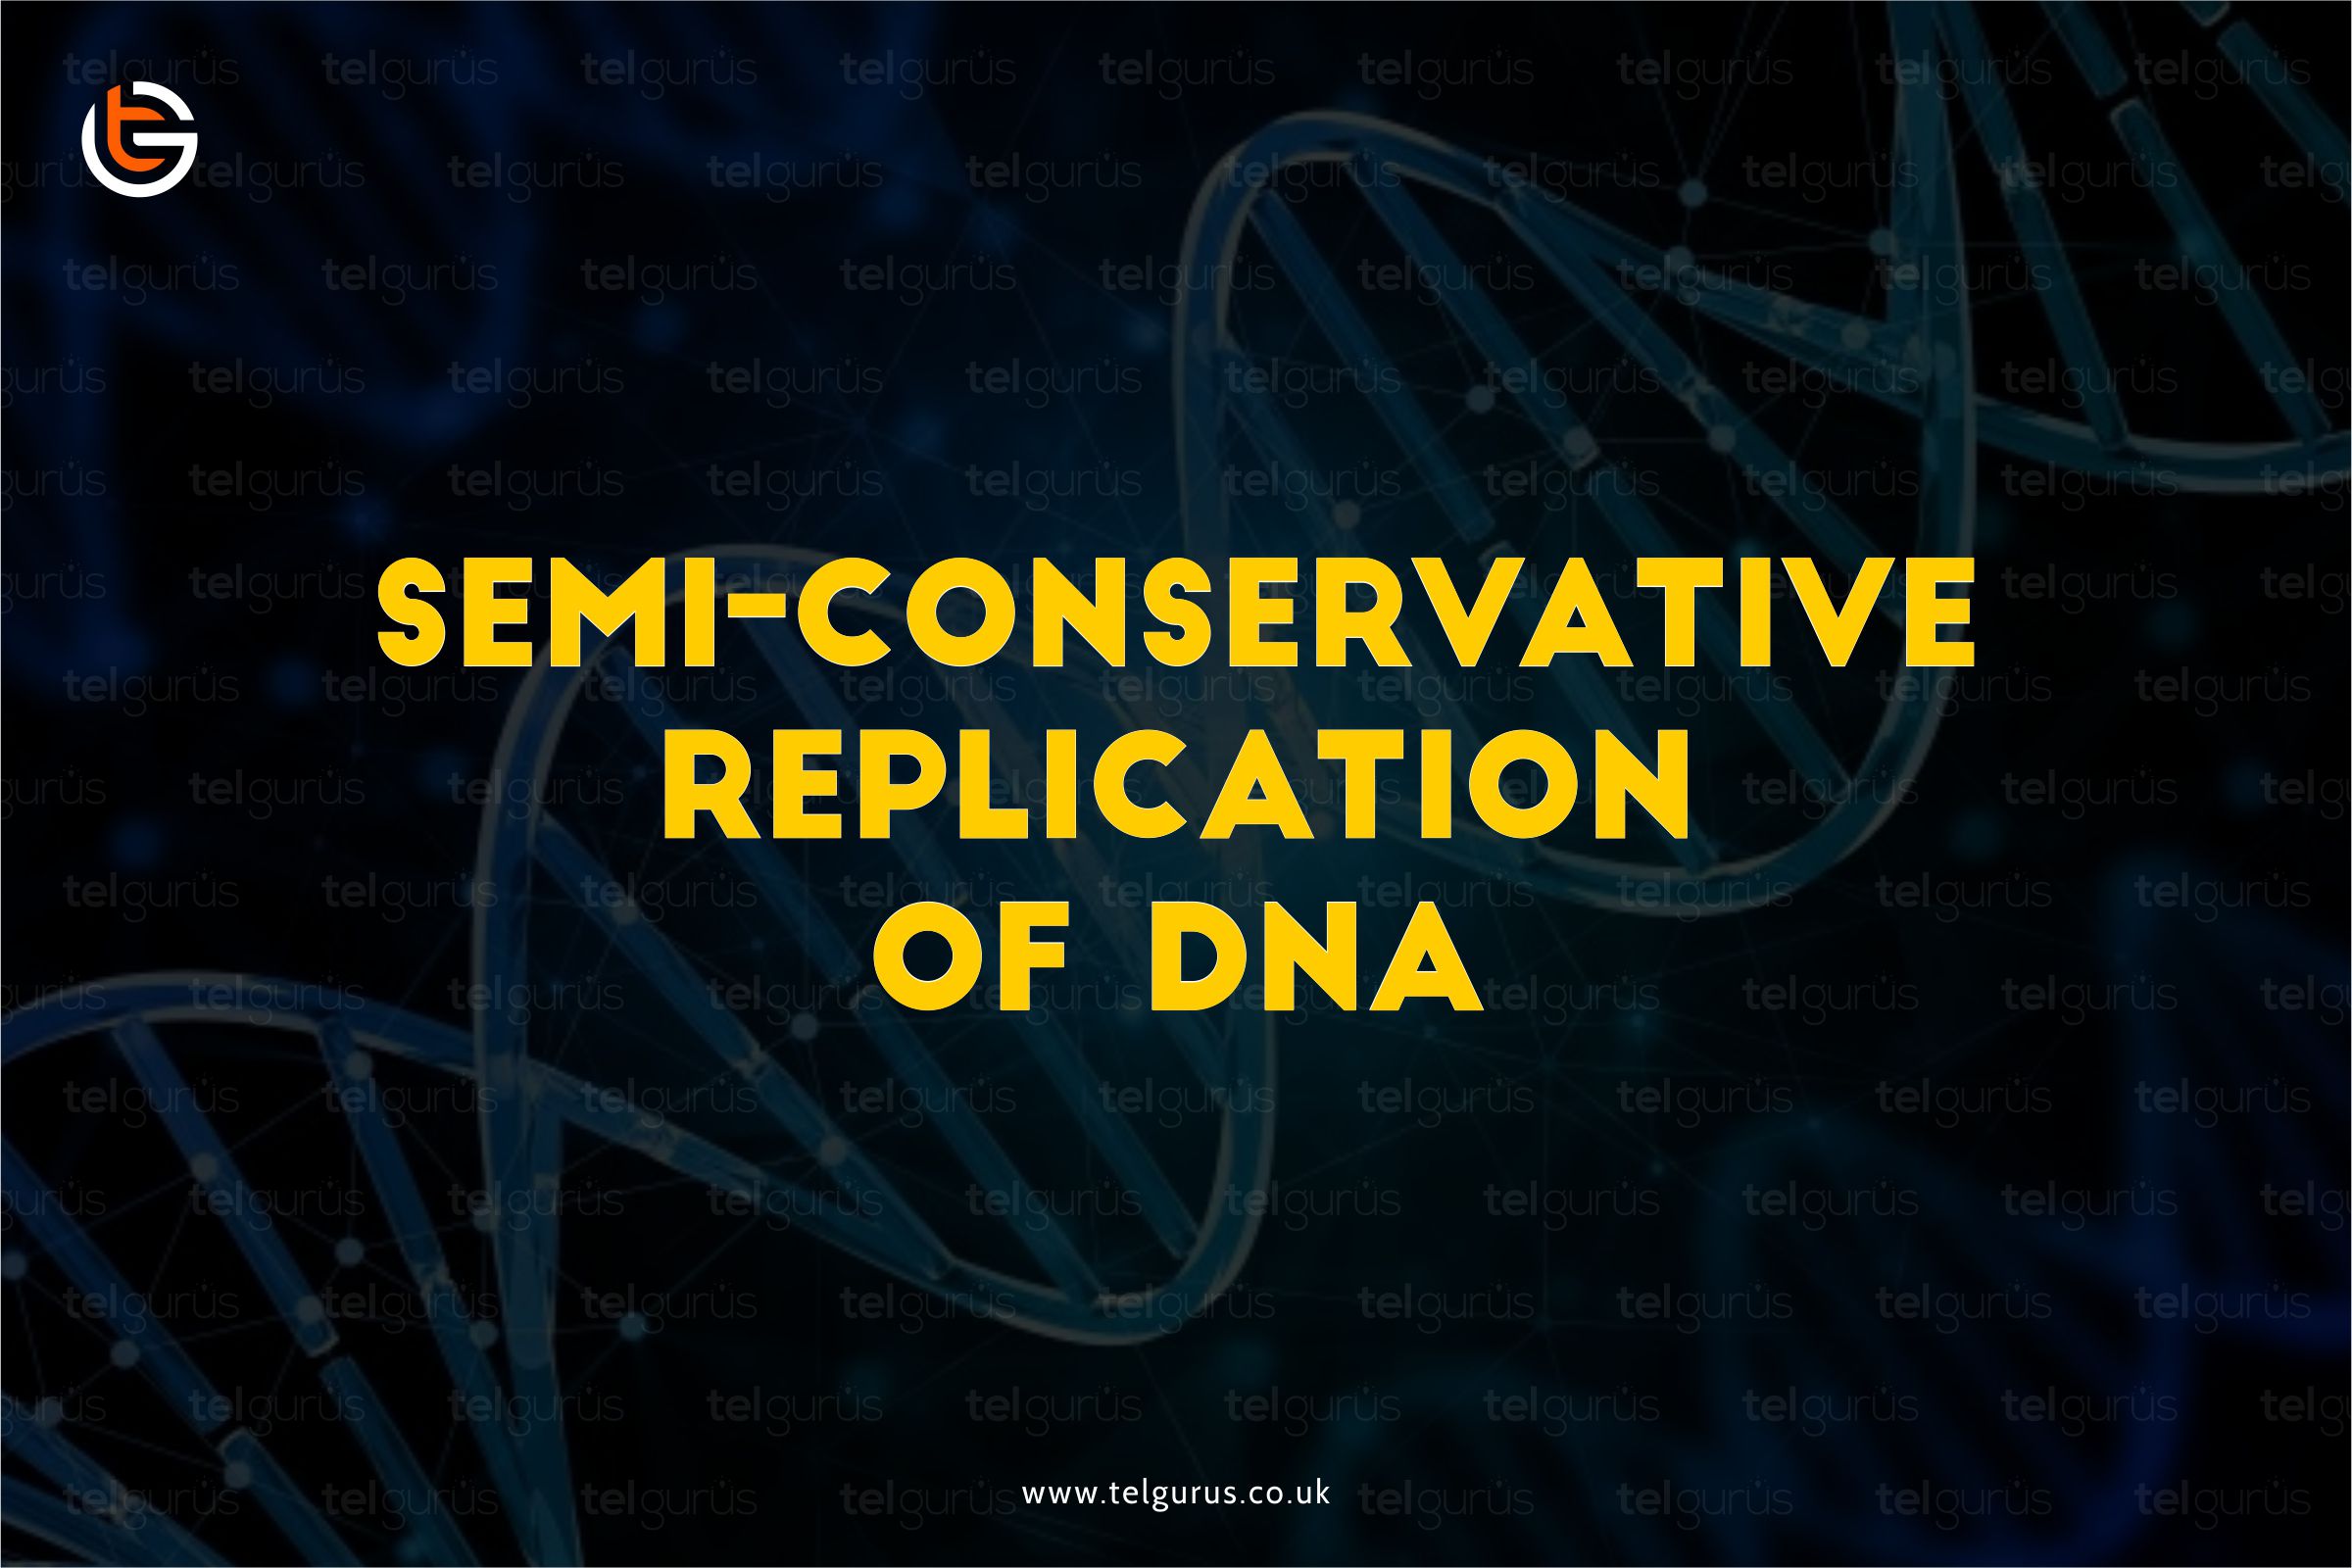 Replication of DNA